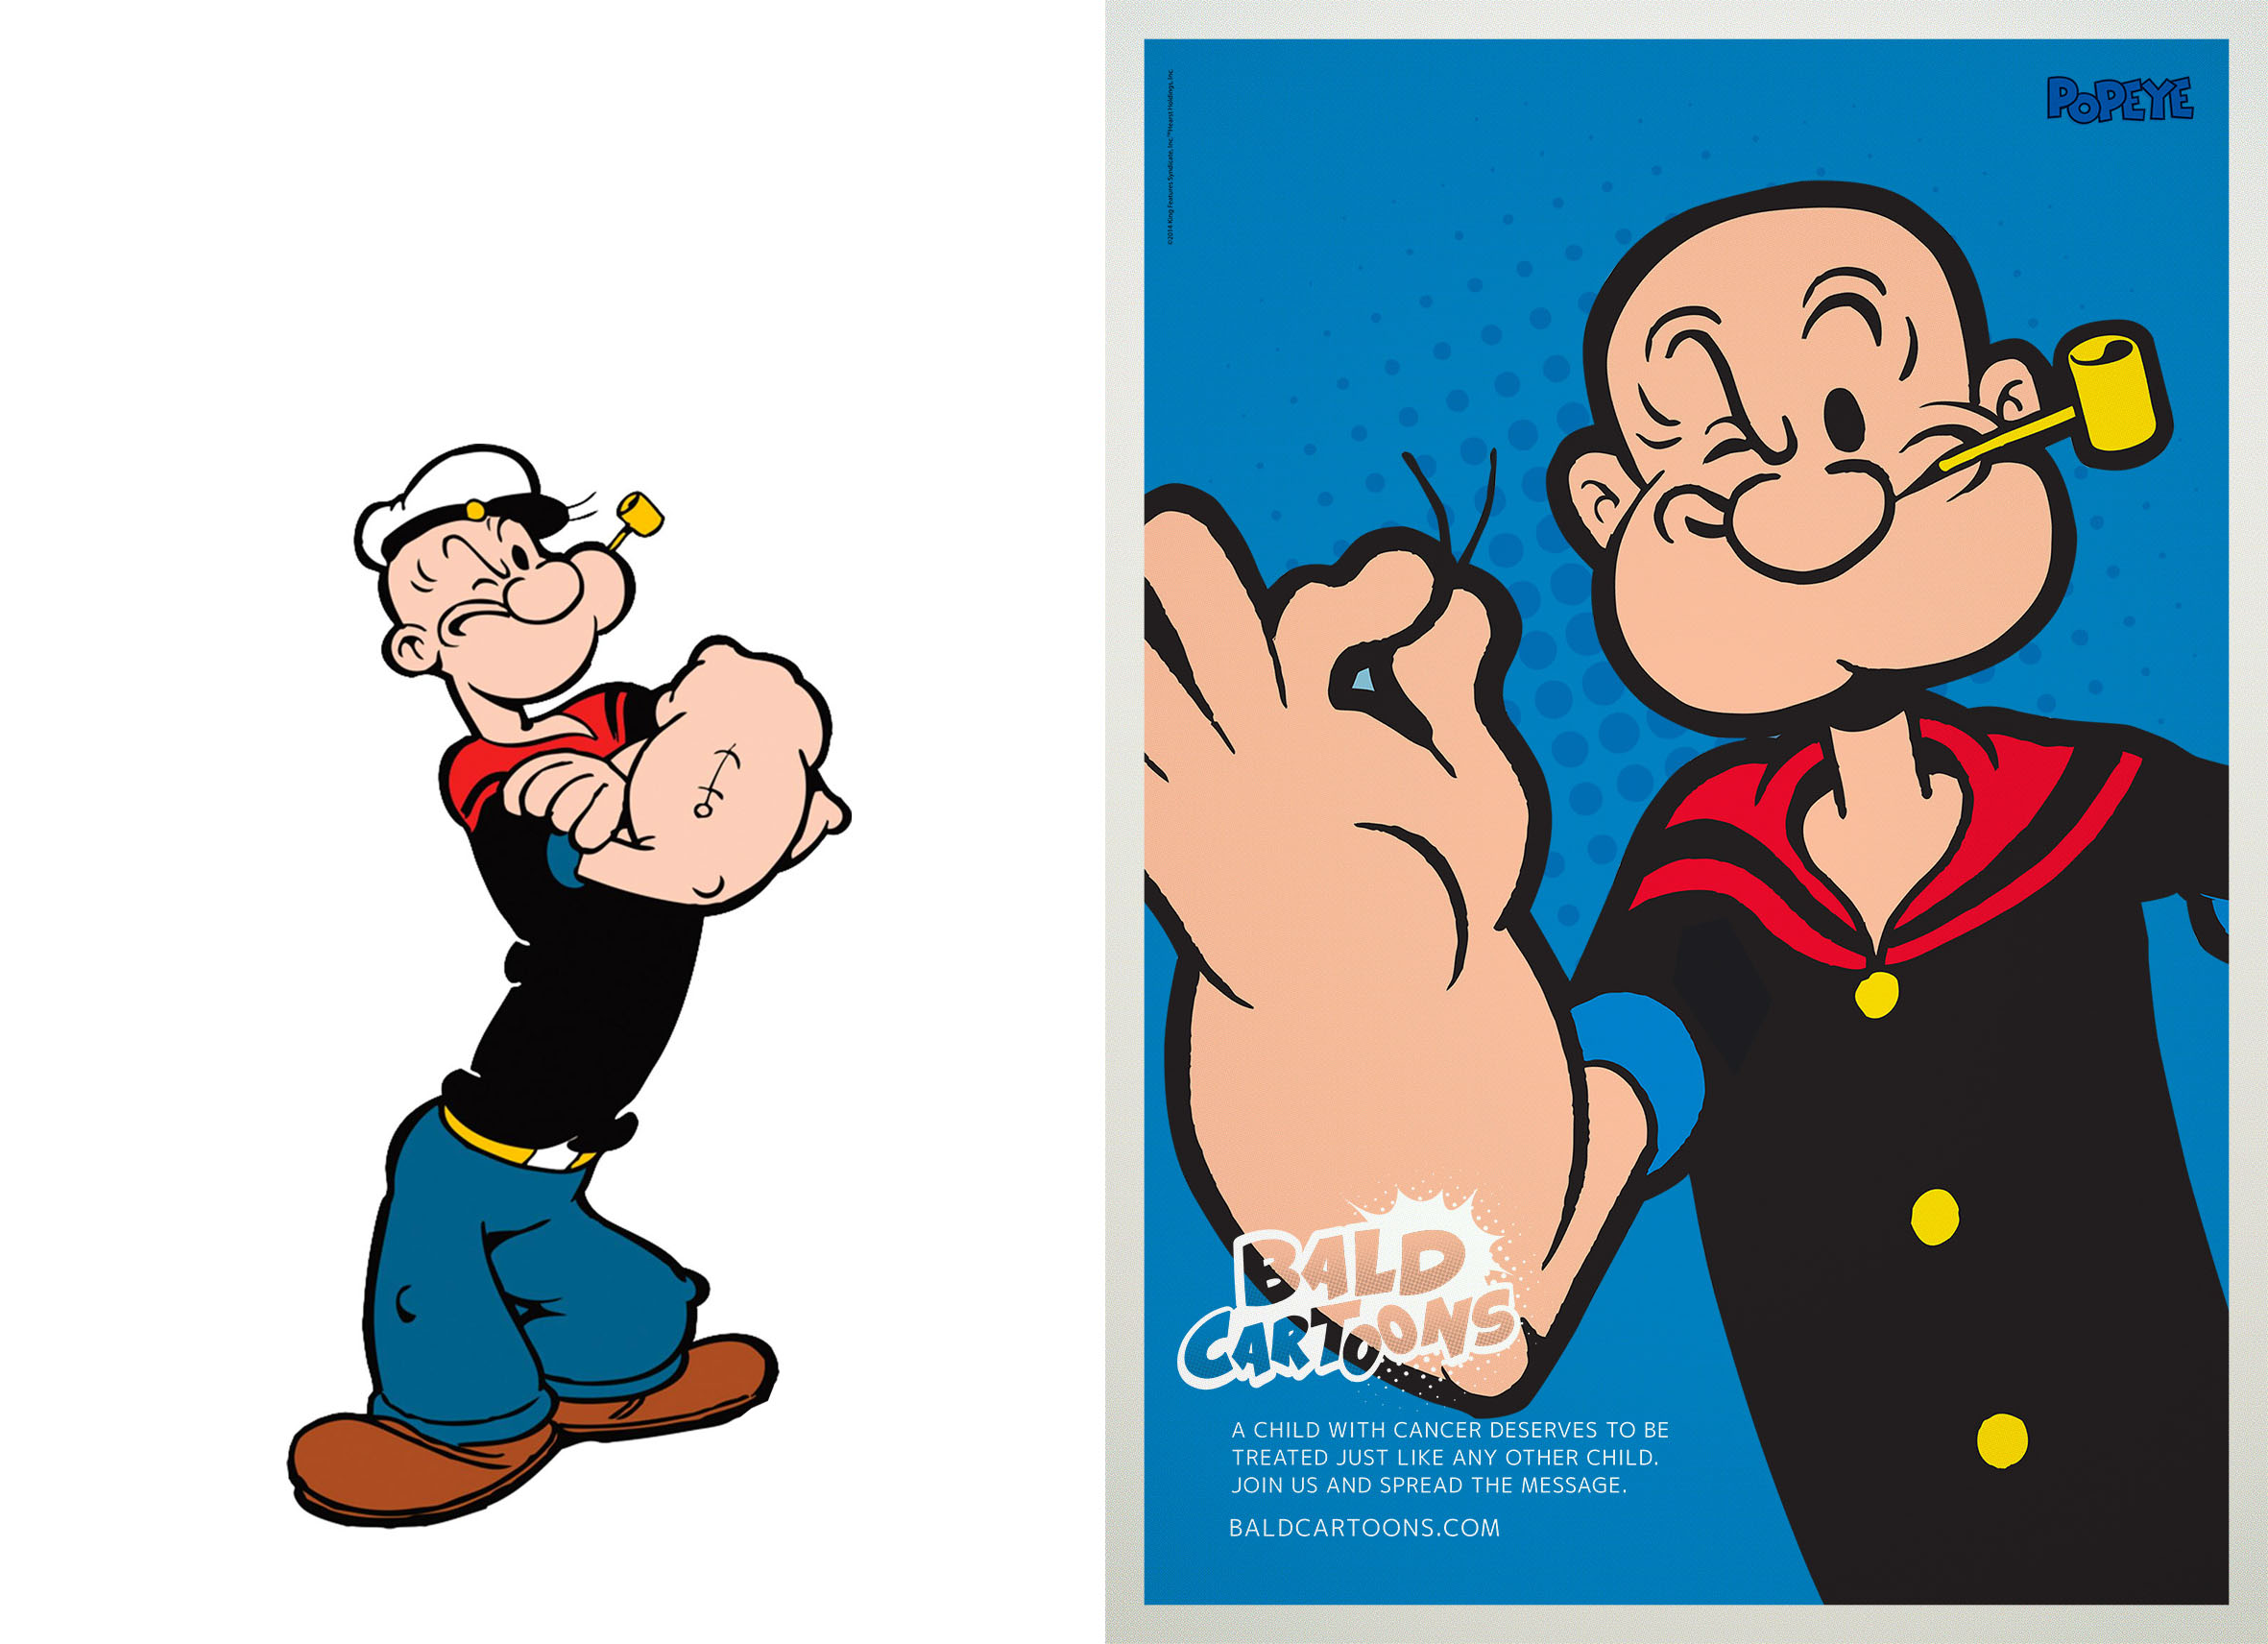 Famous Bald Cartoon Characters ~ Hilarious Illustrations Of Some Of The ...